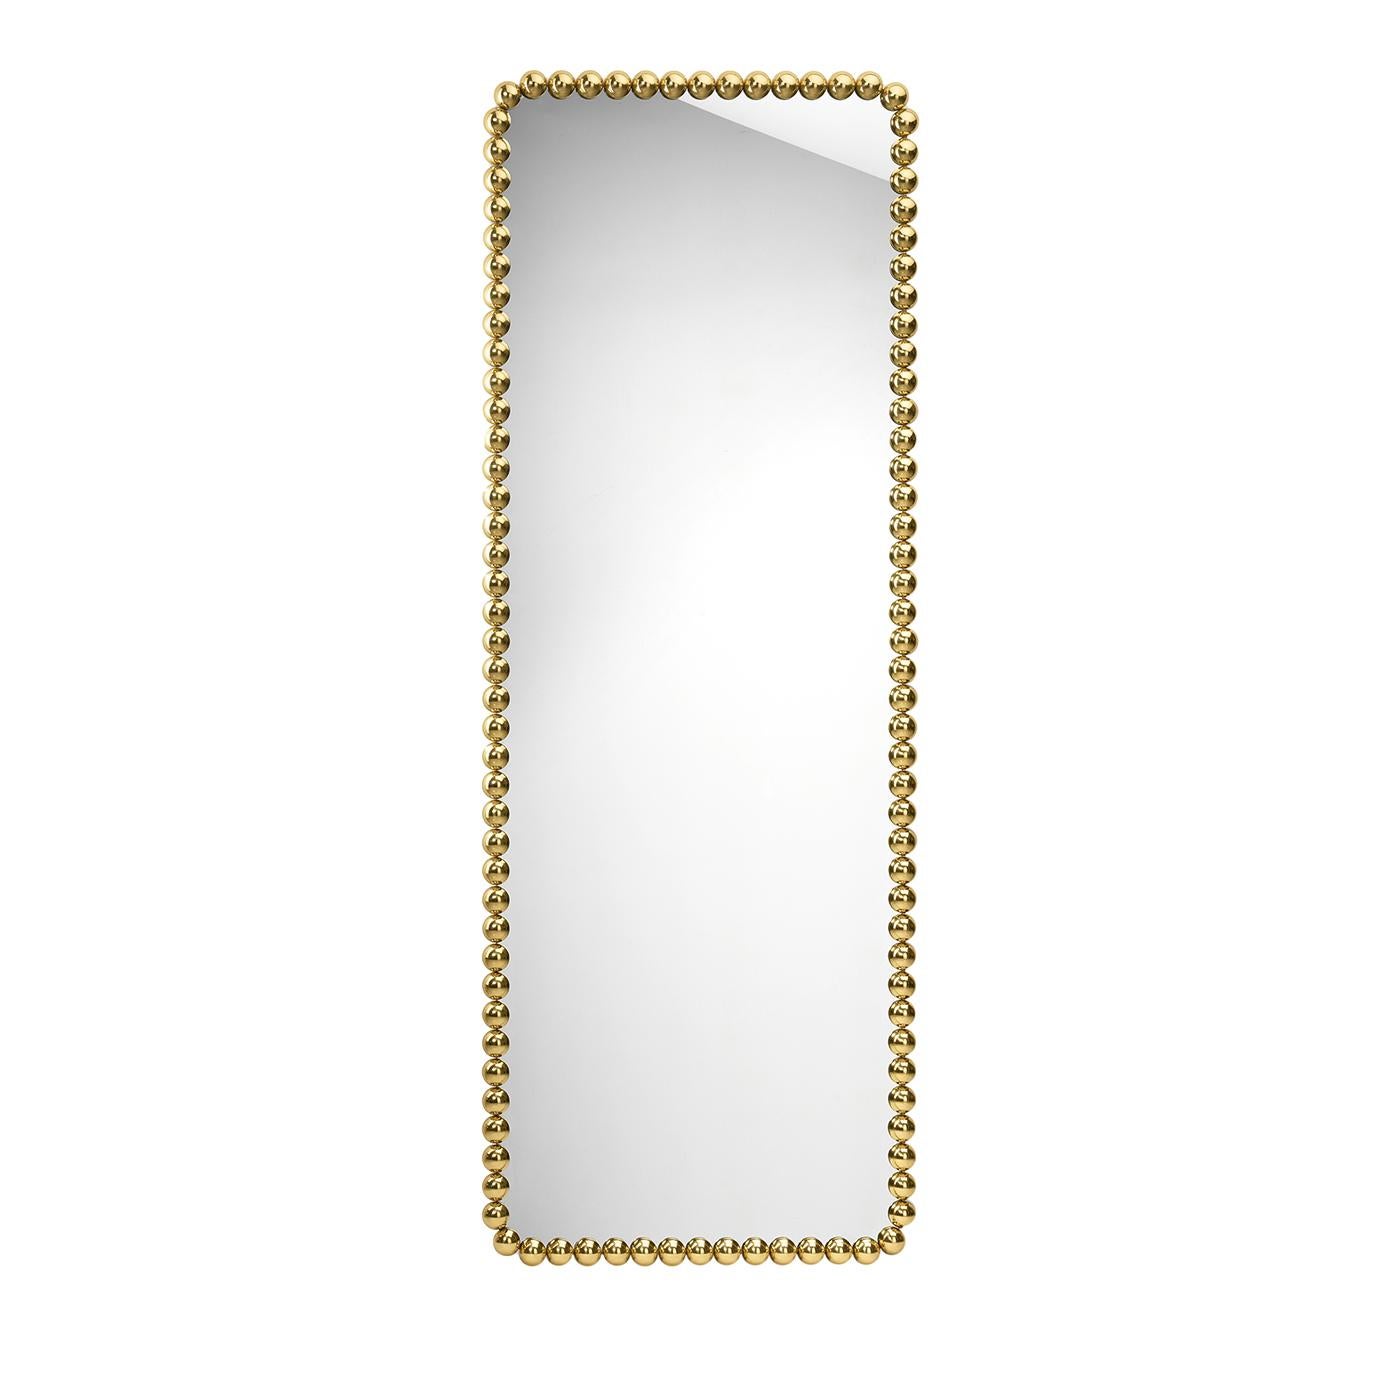 A jewel to showcase on a bare wall, this freestanding mirror flaunts an enchanting brass frame consisting of gold-finished beads that recall precious necklaces. A marvelous addition to modern decors where one wants to infuse glamour, its